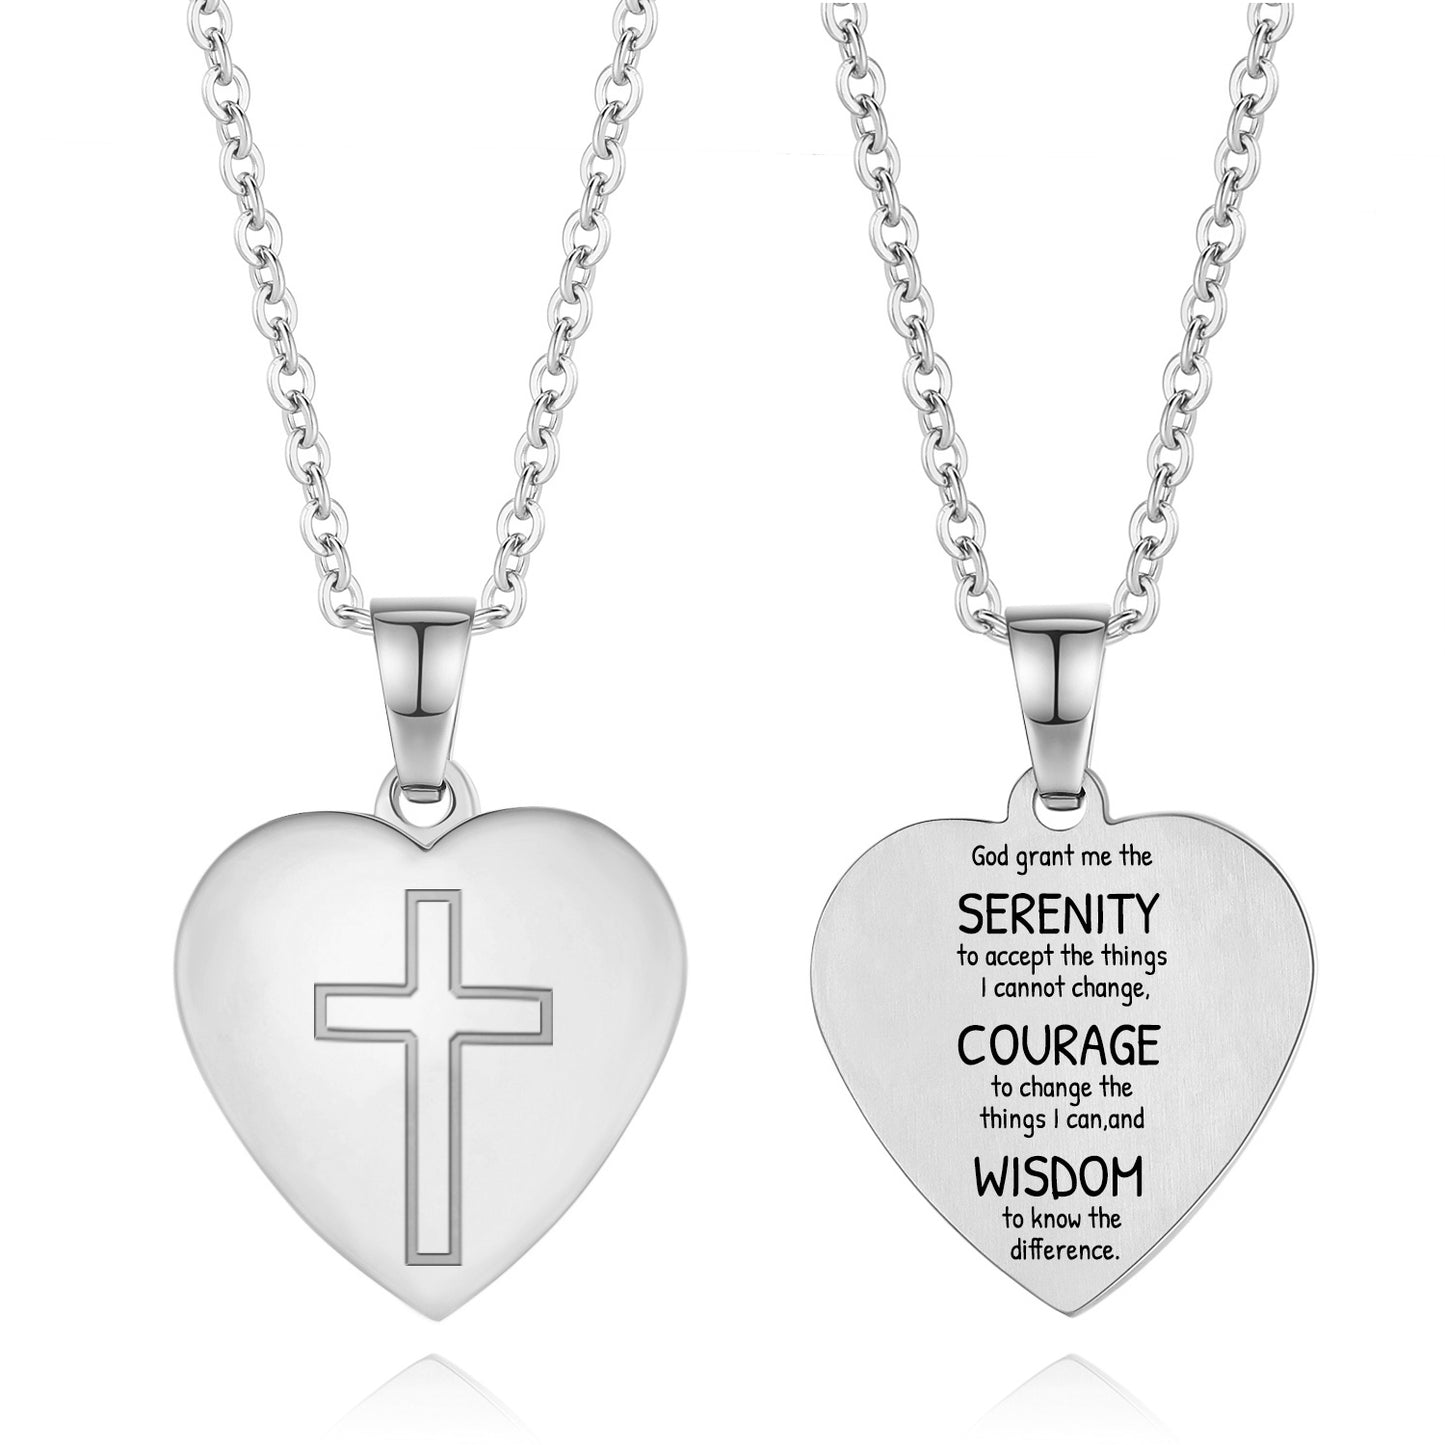 Heart Cross Pendant Necklace Engraved Bible Verses - Great Christian Gift for Women at Christmas, New Year, Birthdays and Baptisms